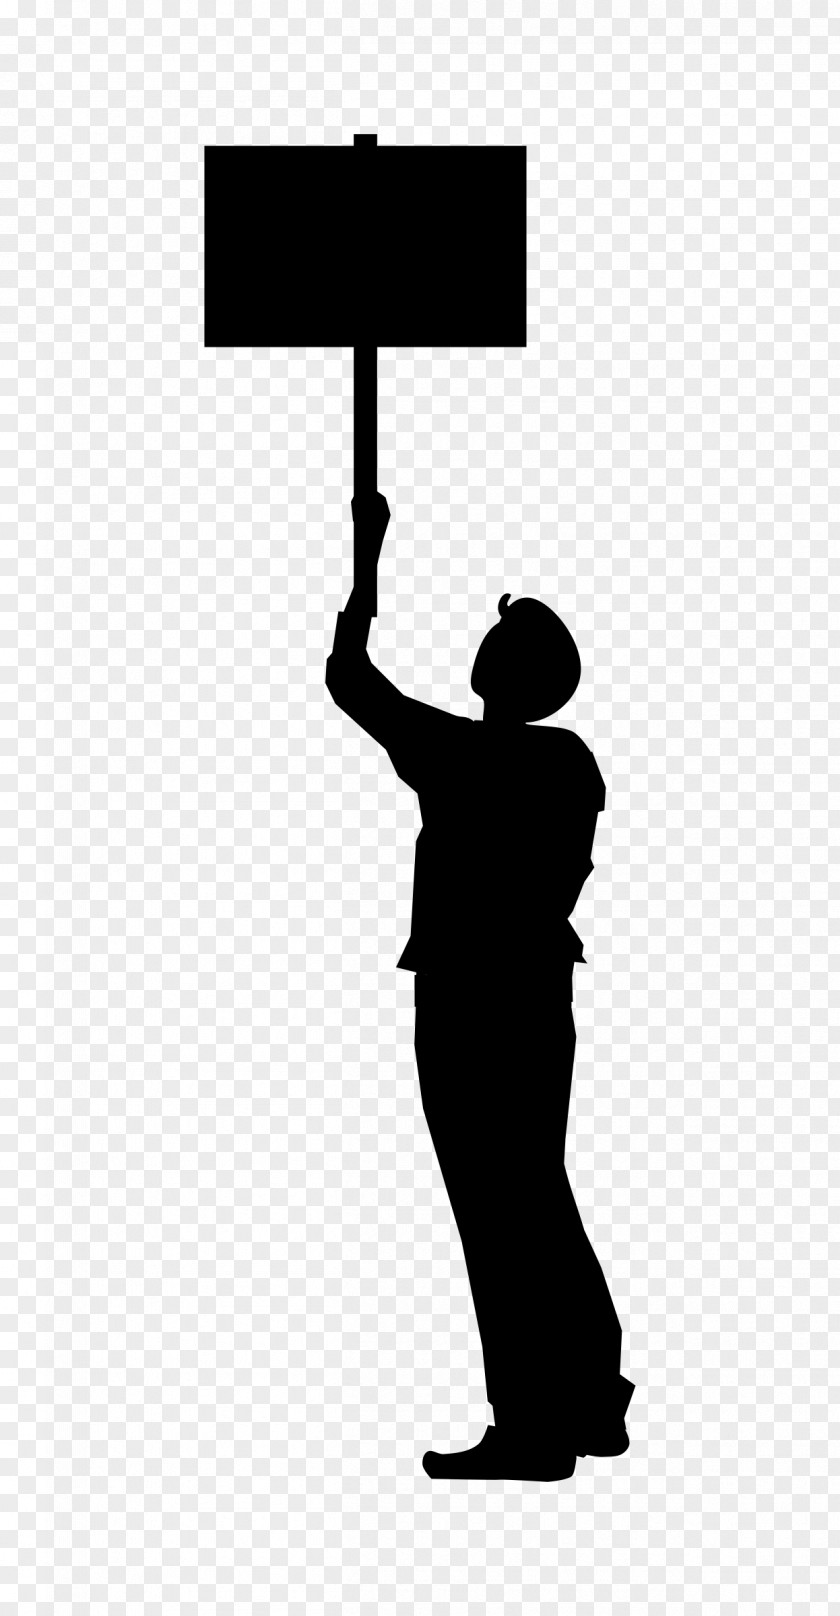 Worker Flag Of The United States Silhouette Clip Art PNG